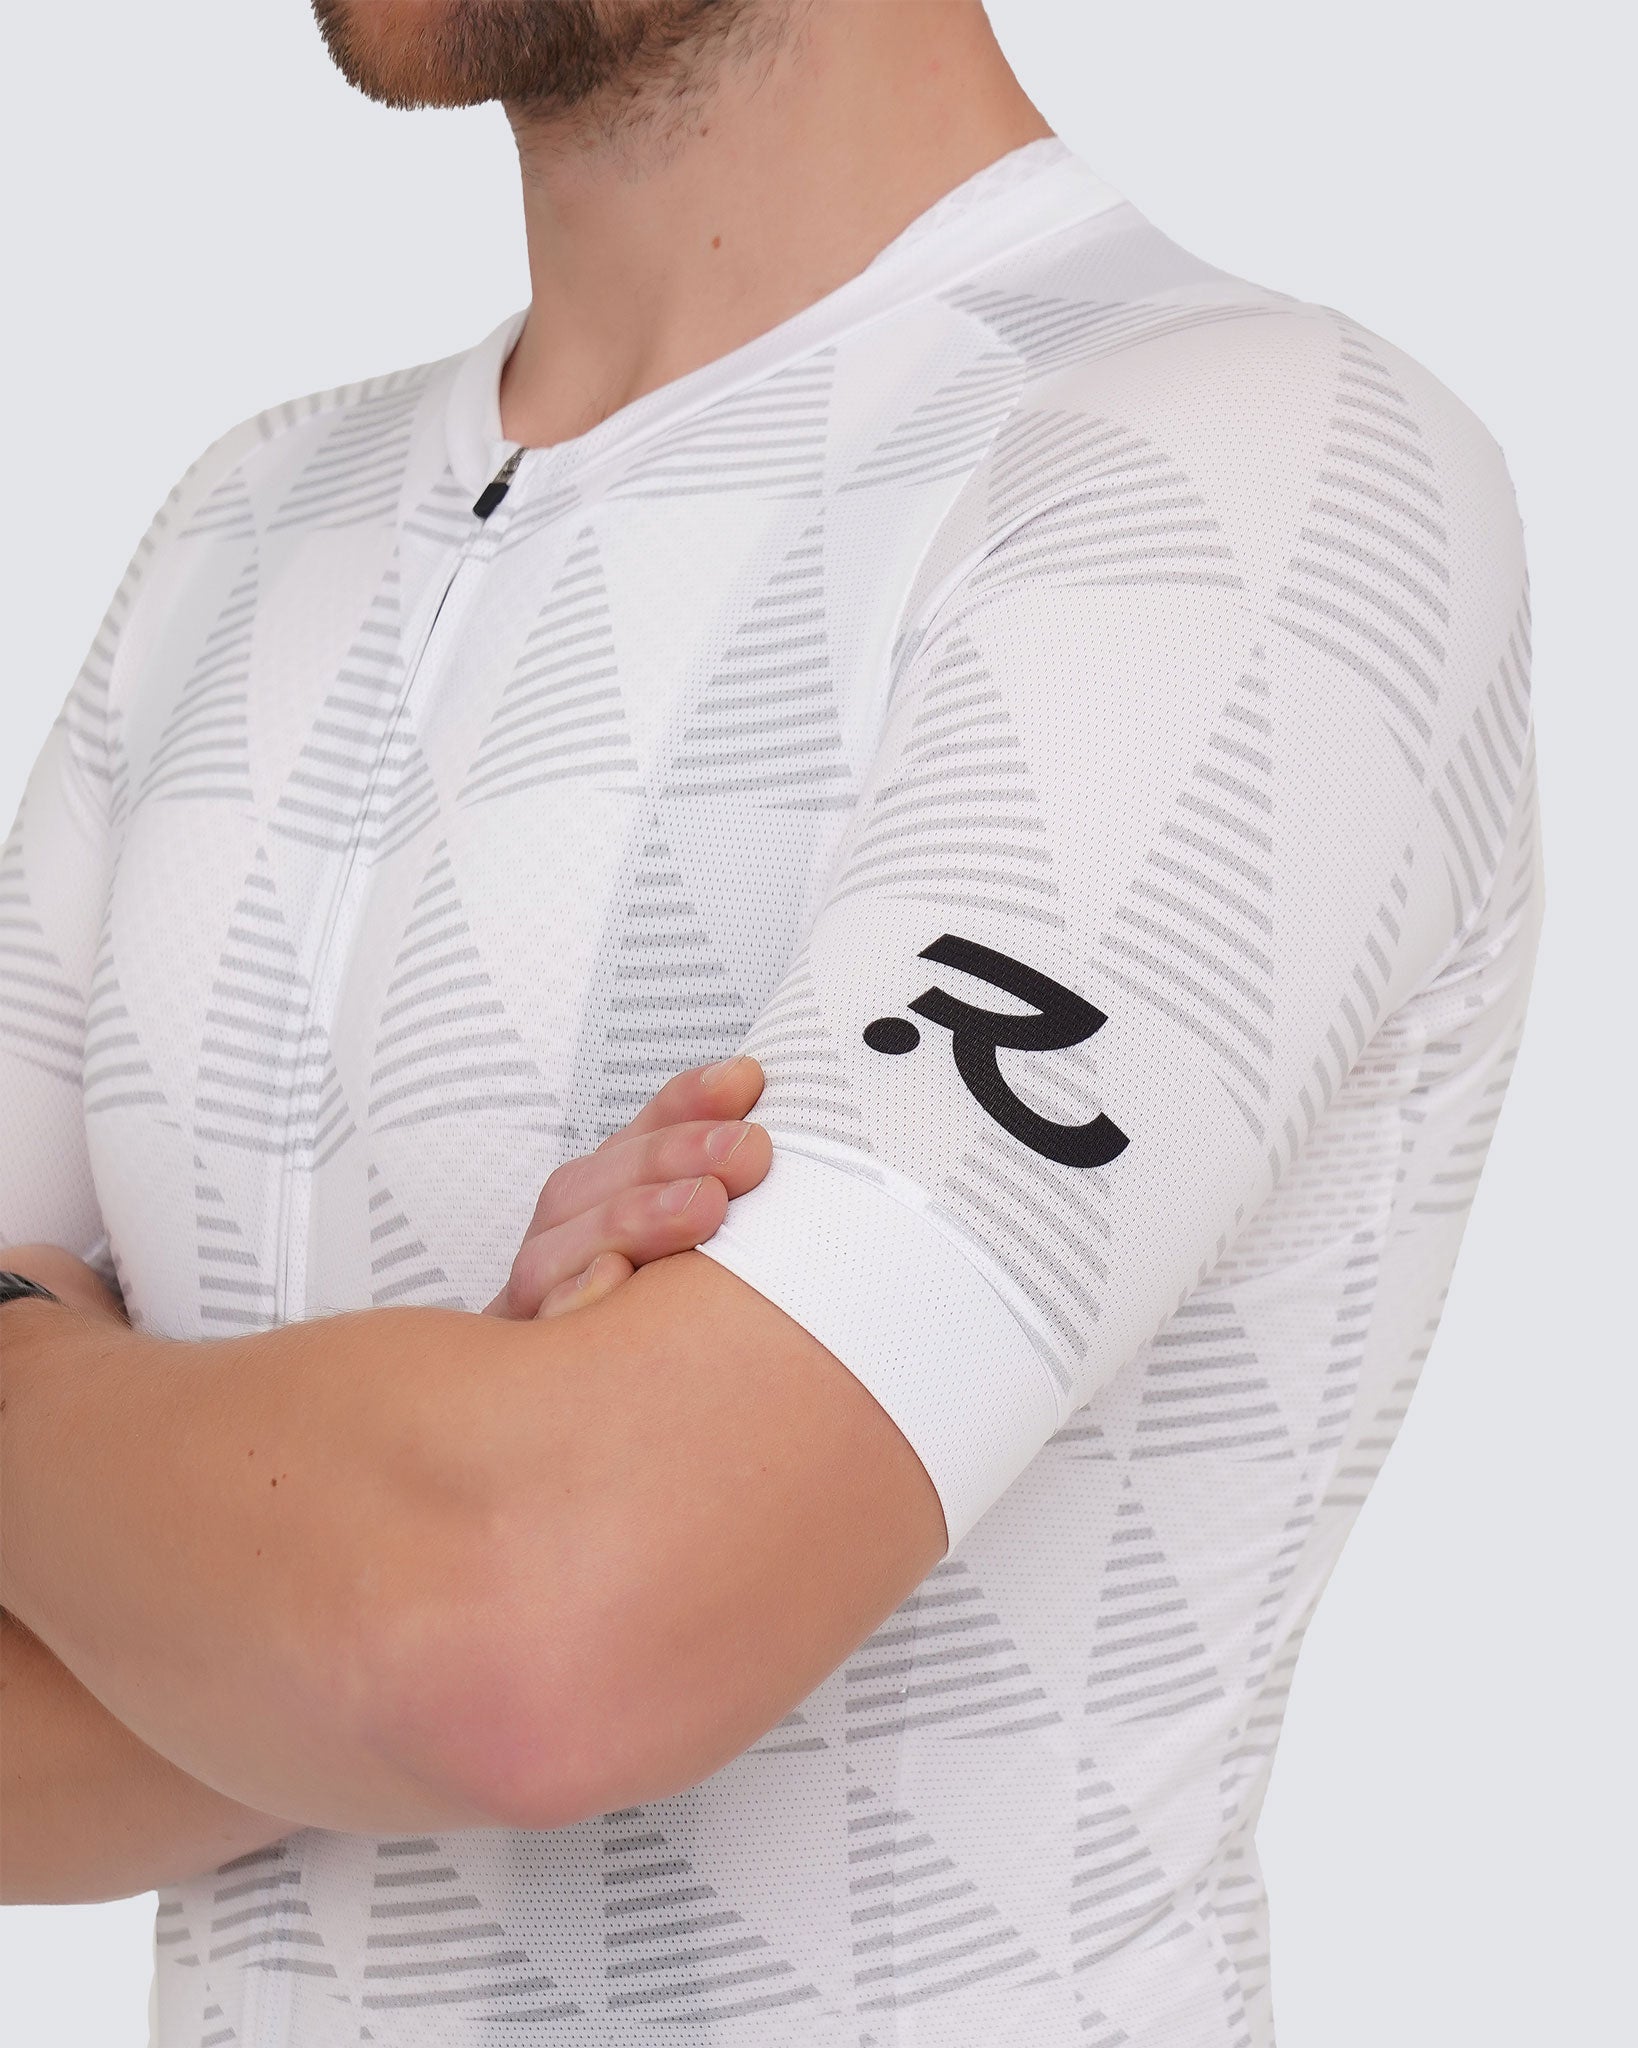 white cycling jersey close up to sleeve